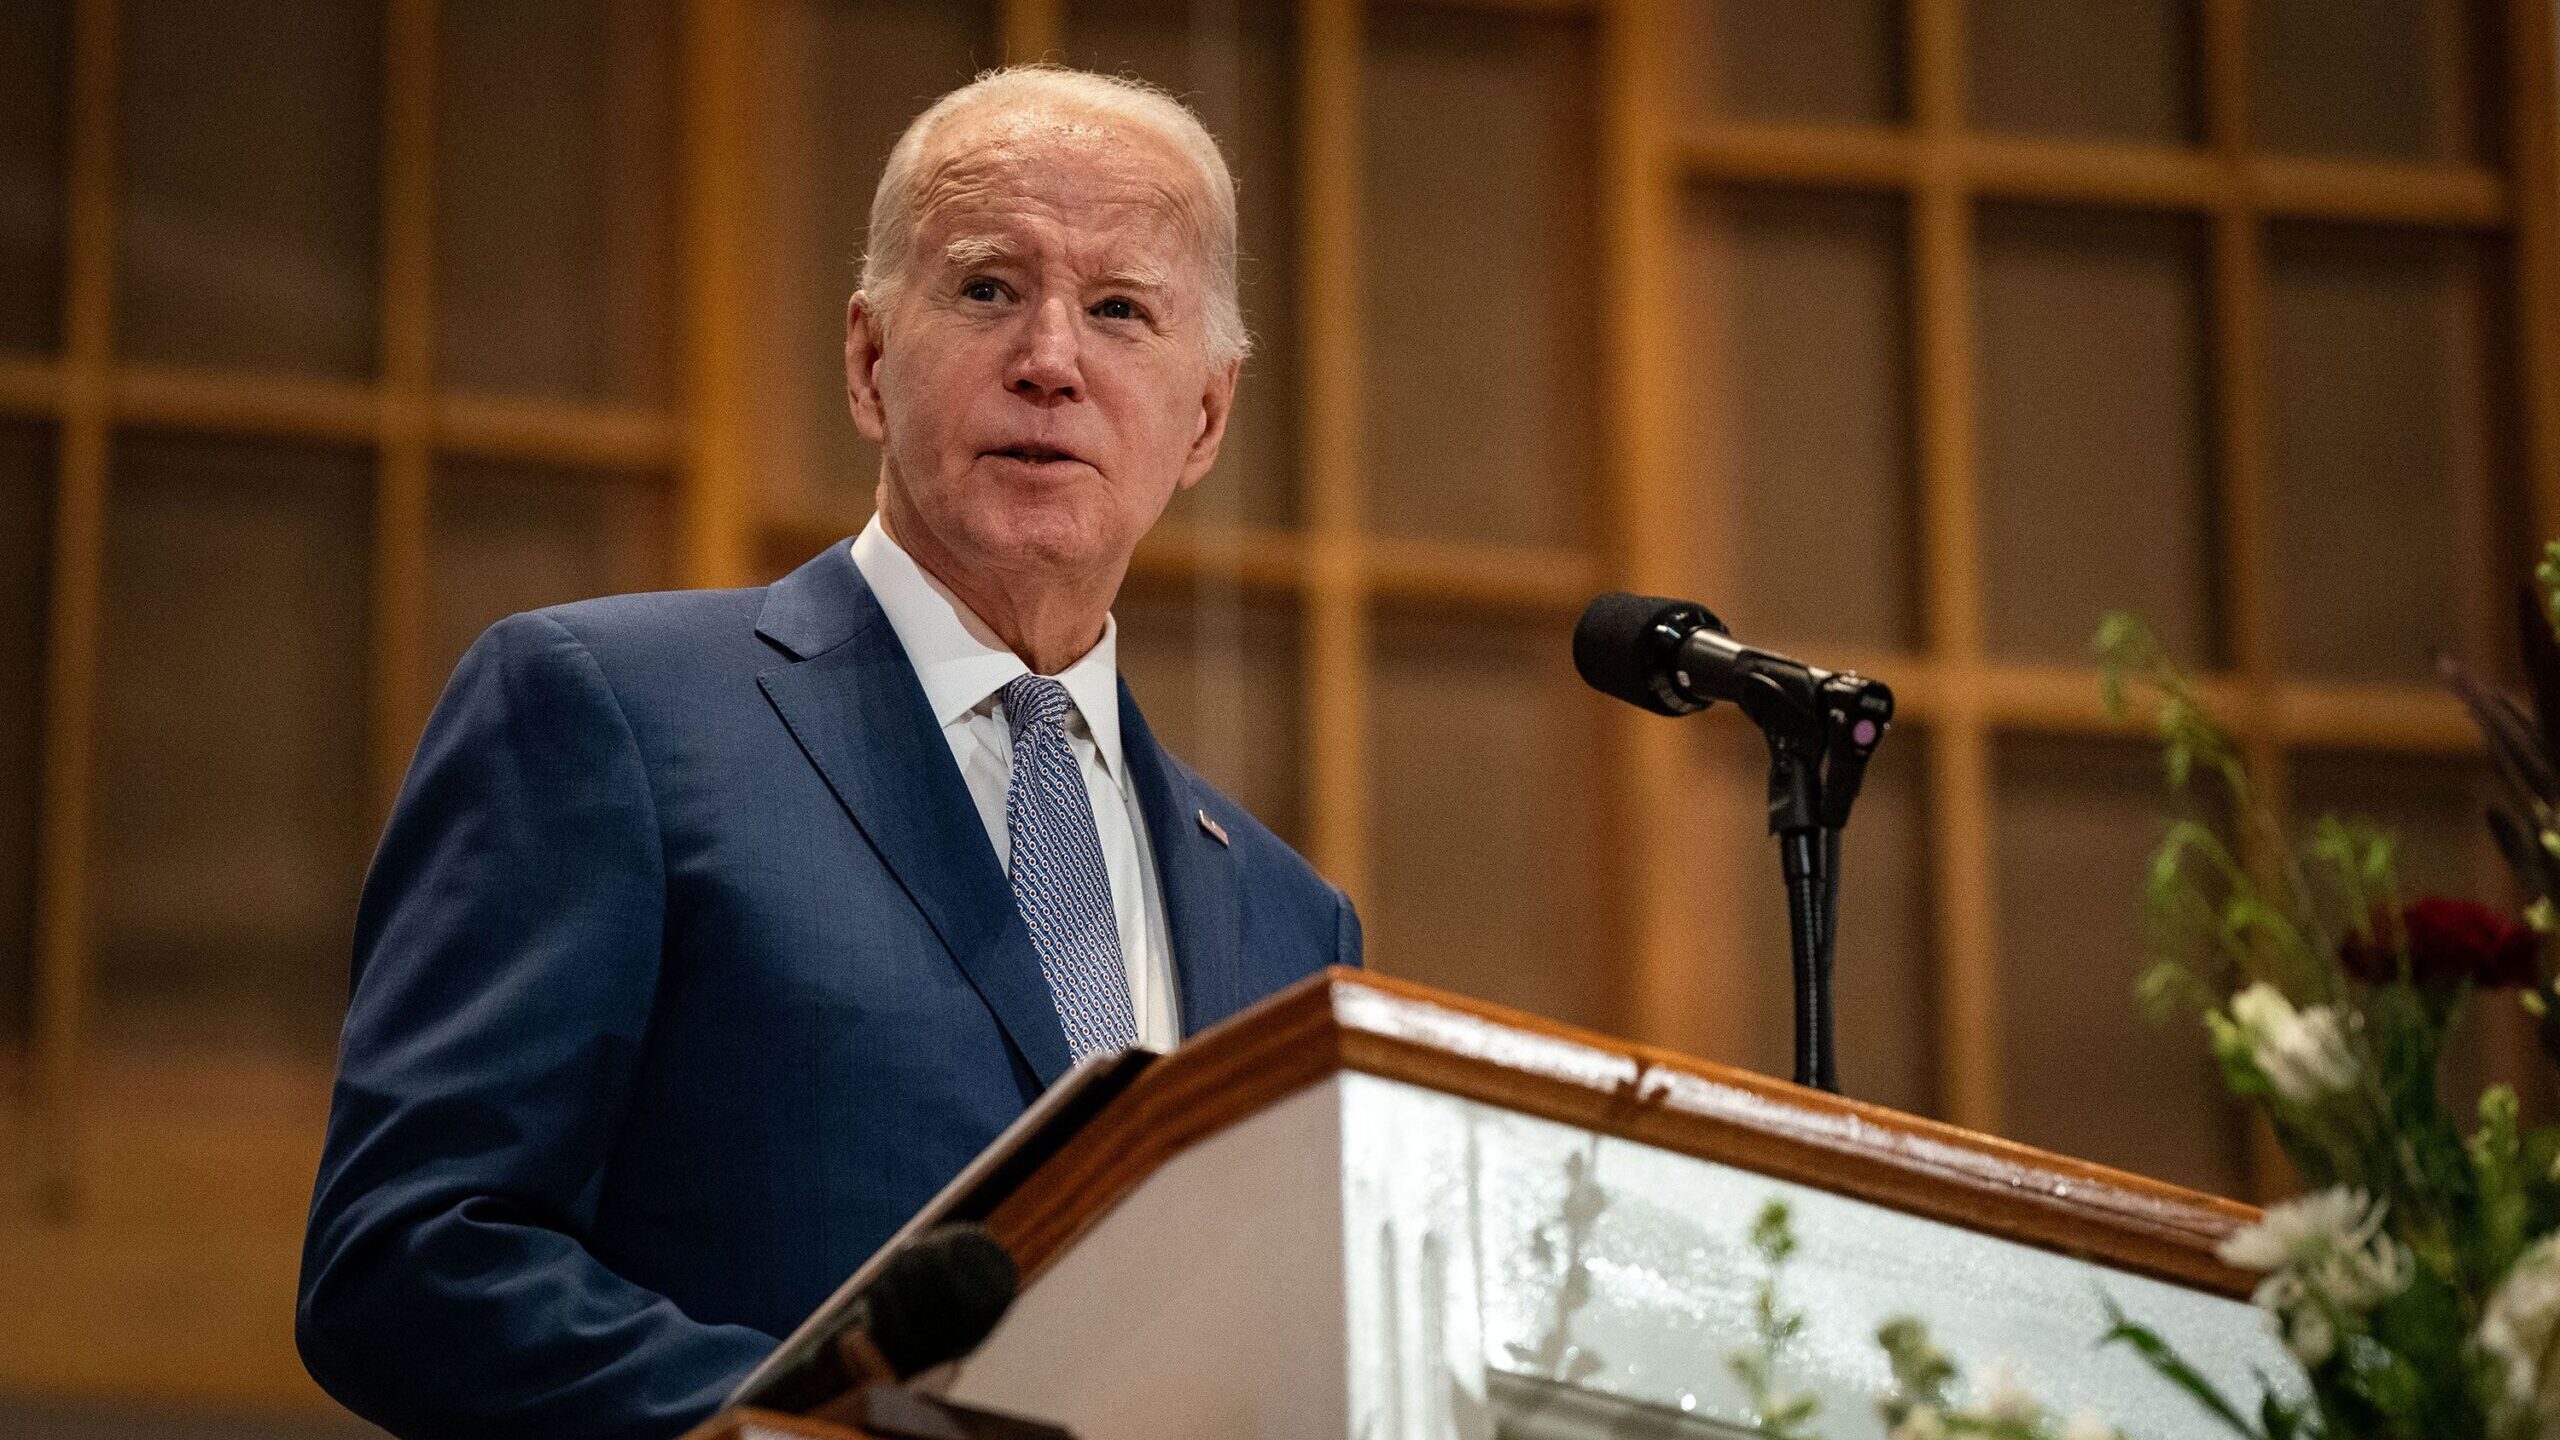 Biden delivers remarks at the St. John Baptist Church in Columbia, South Carolina, on January 28, 2...